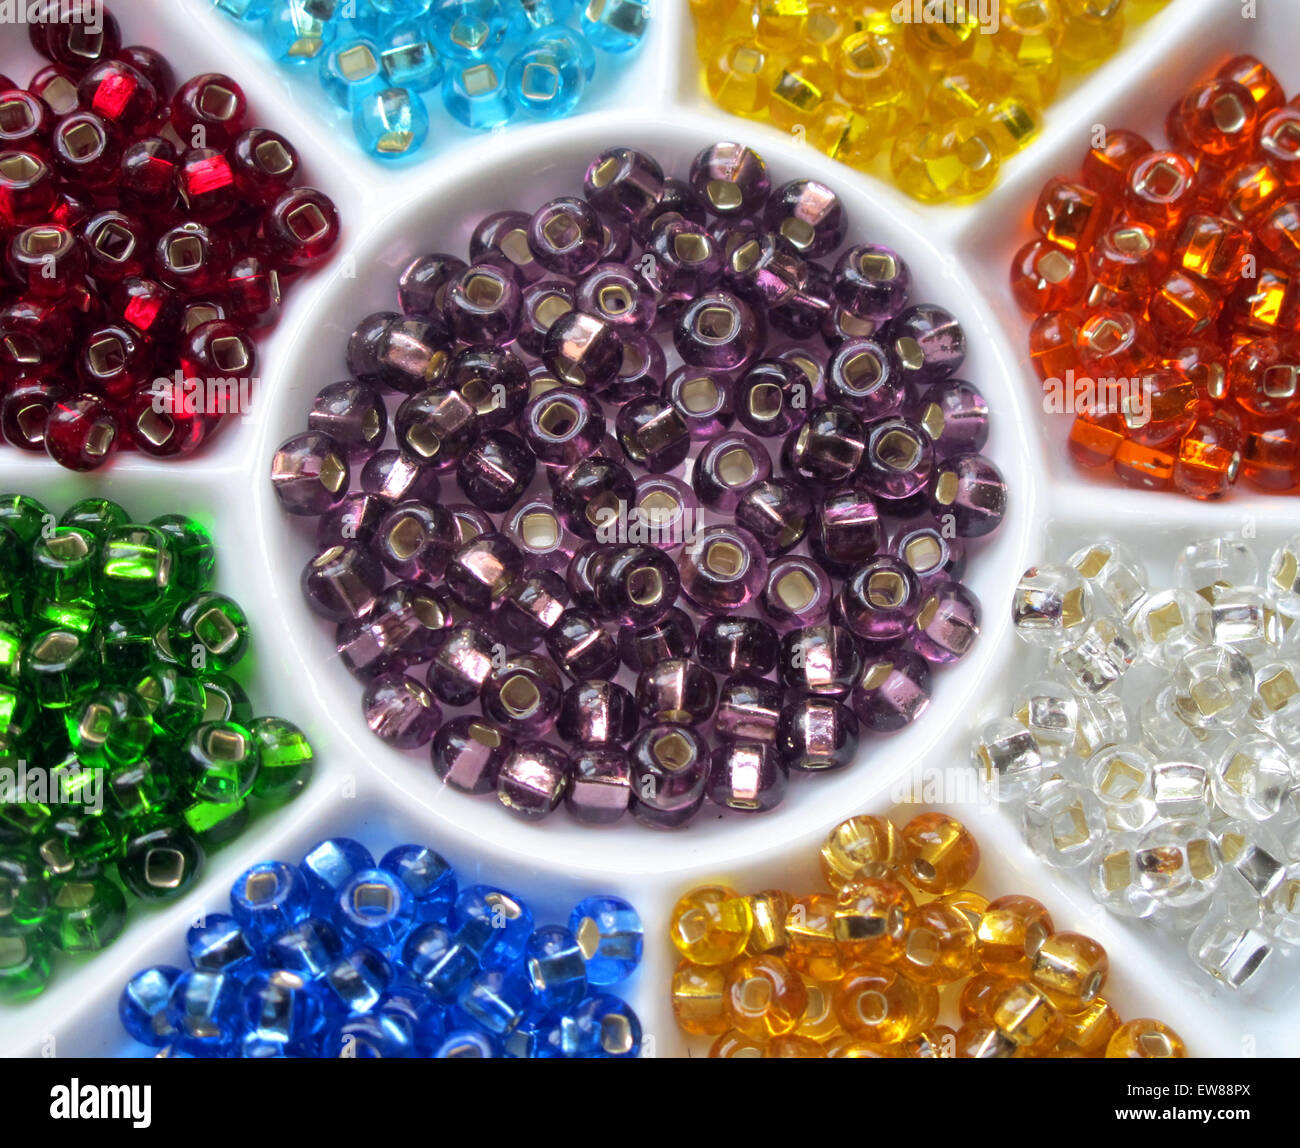 Colorful glass beads in a ceramic bead sorter. Stock Photo